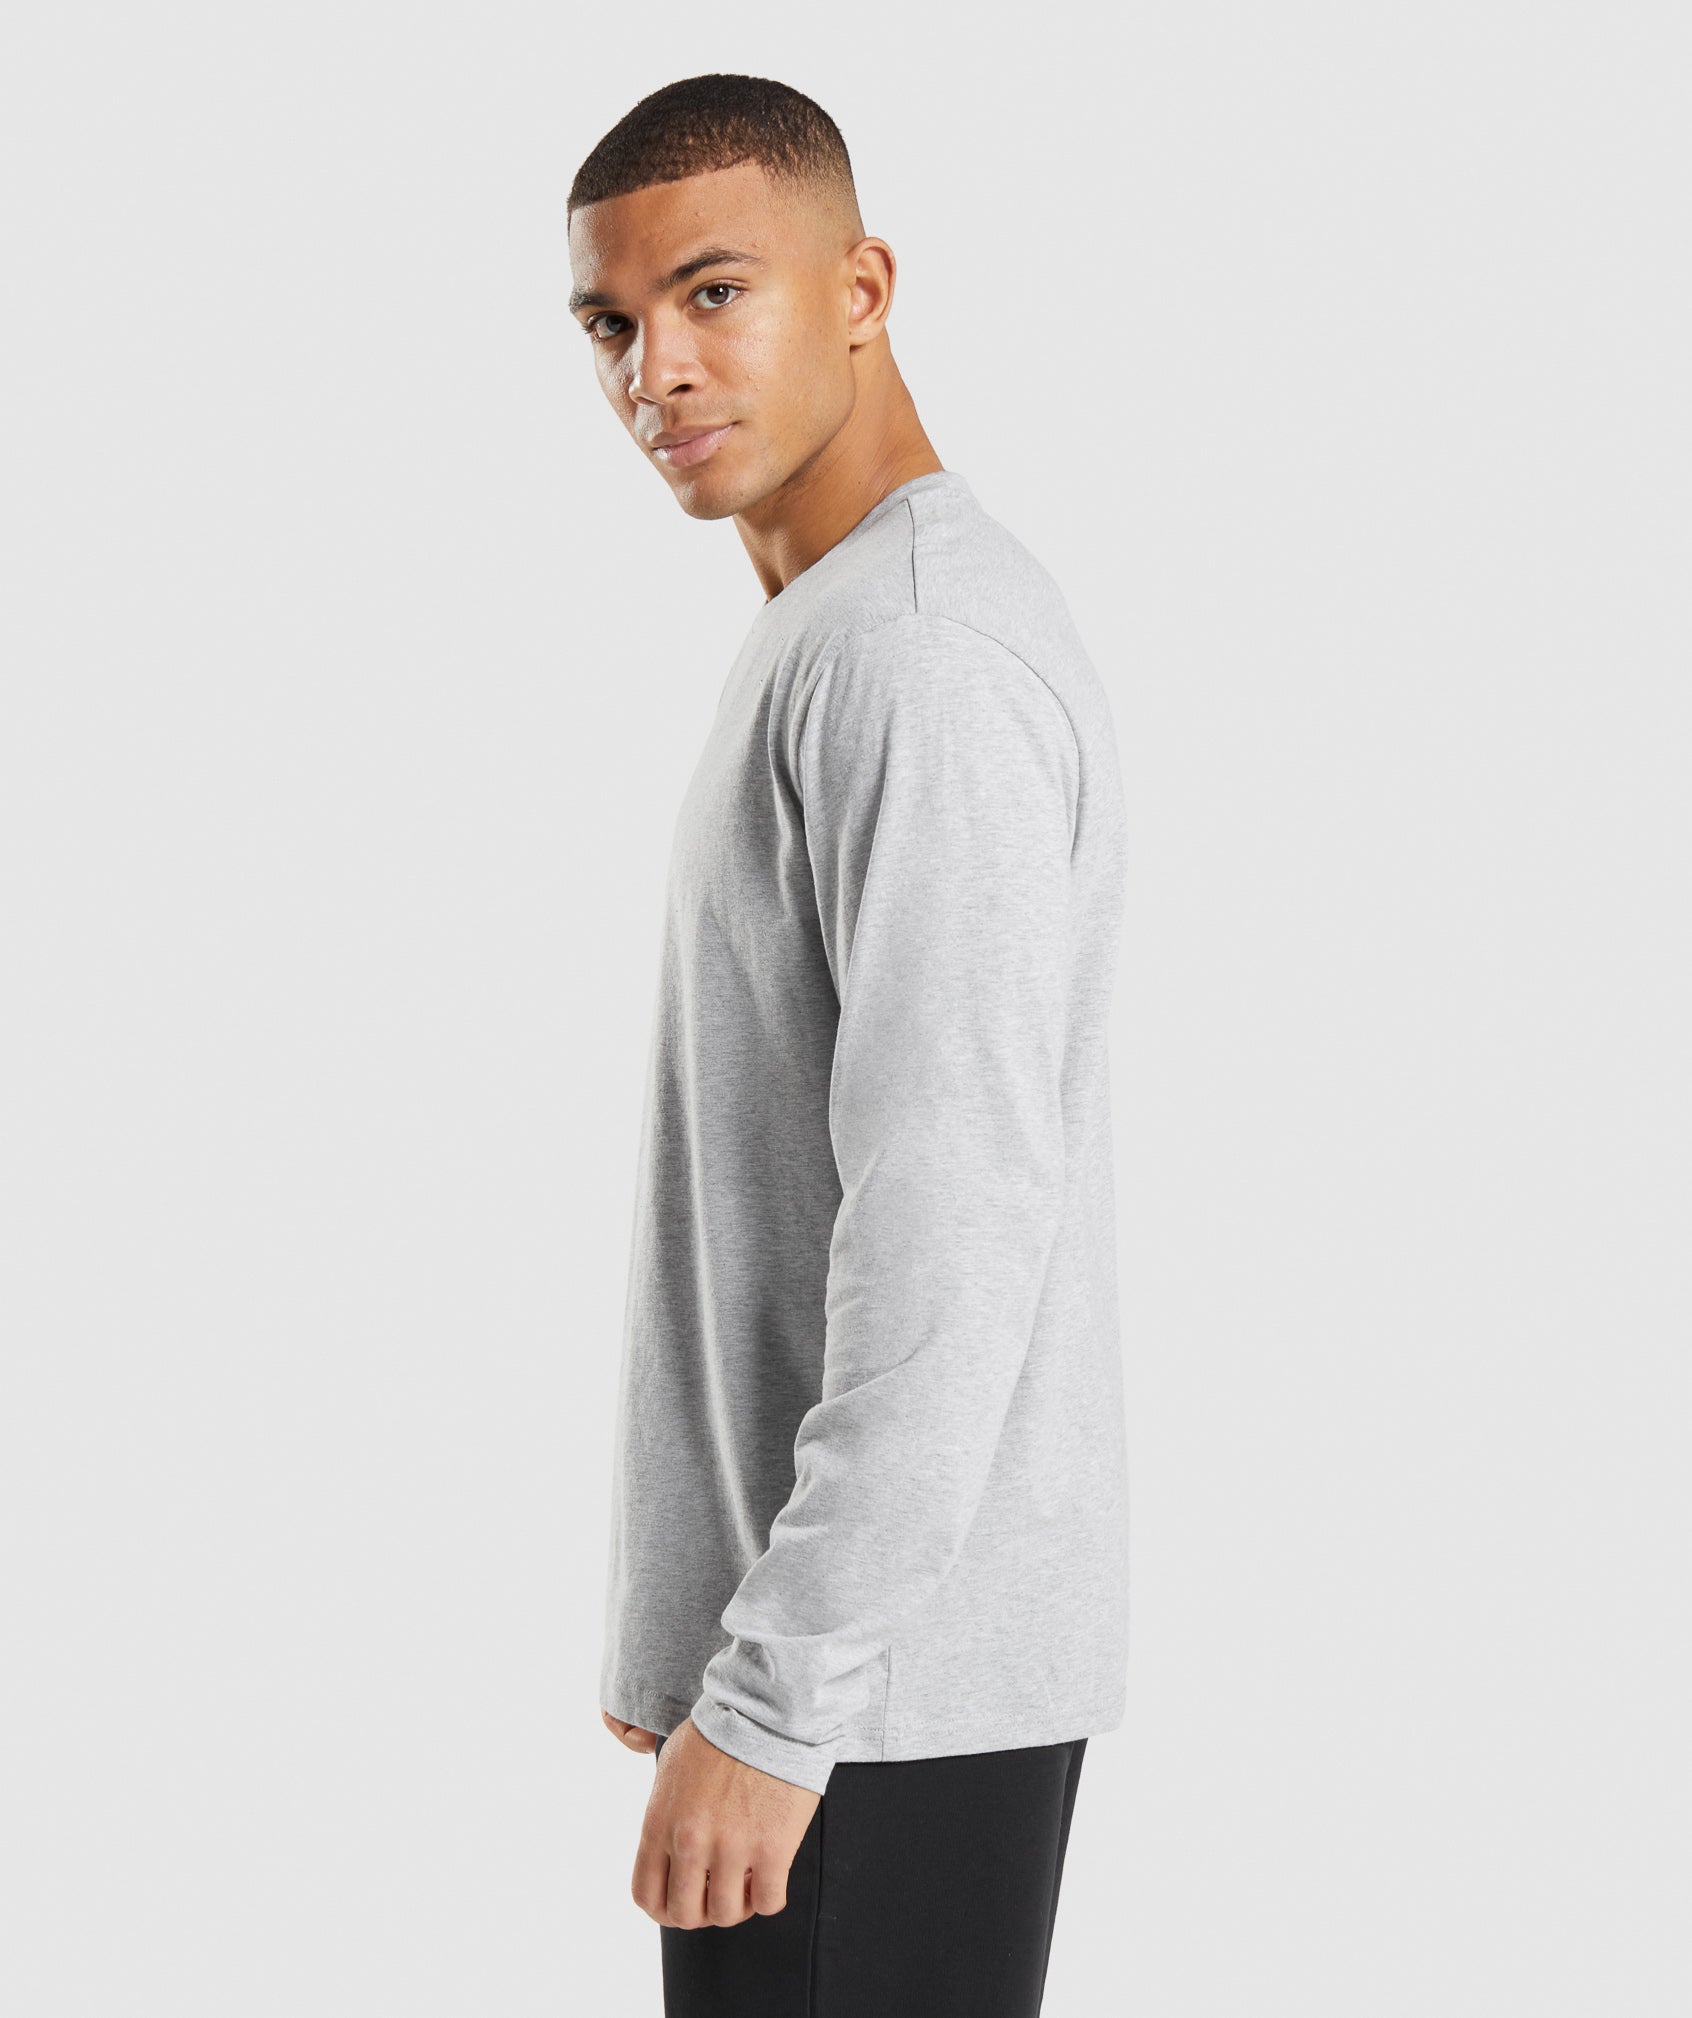 Crest Long Sleeve T-Shirt in Light Grey Core Marl - view 3